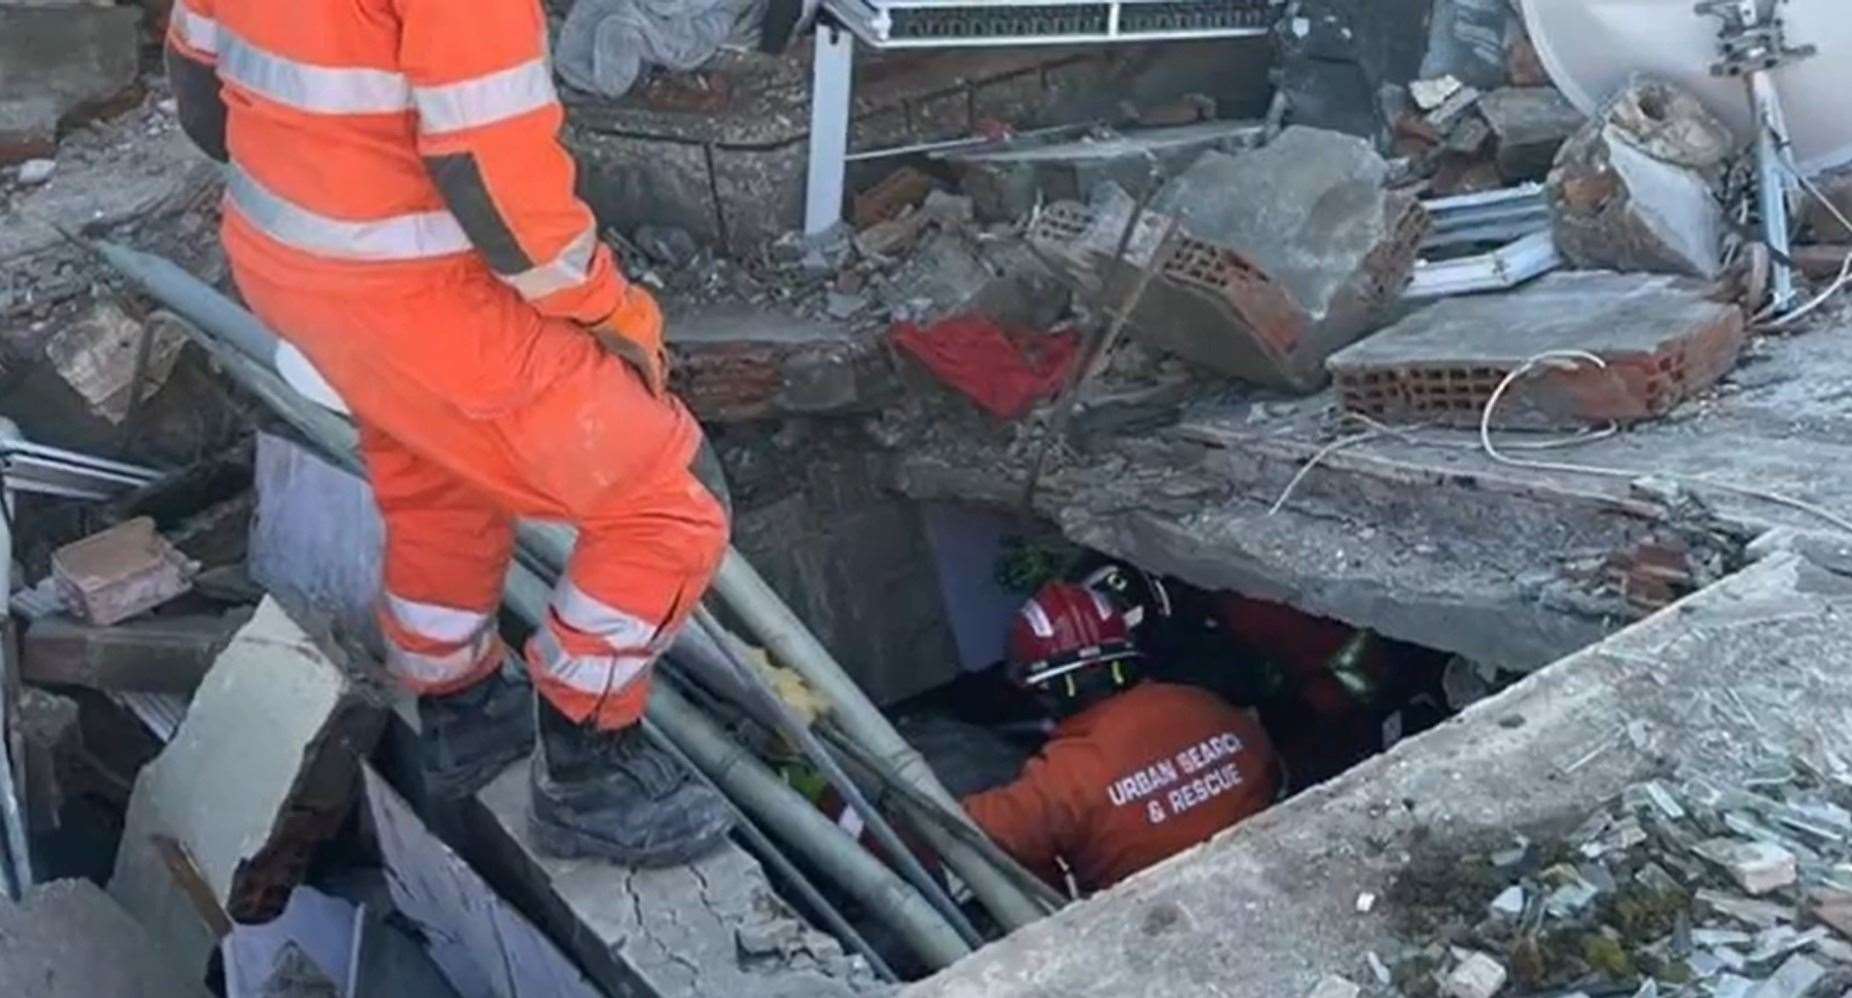 The team has also rescued two adults who had been trapped under rubble for 120 hours, as well as a two-year-old girl who had been under the rubble for 101 hours